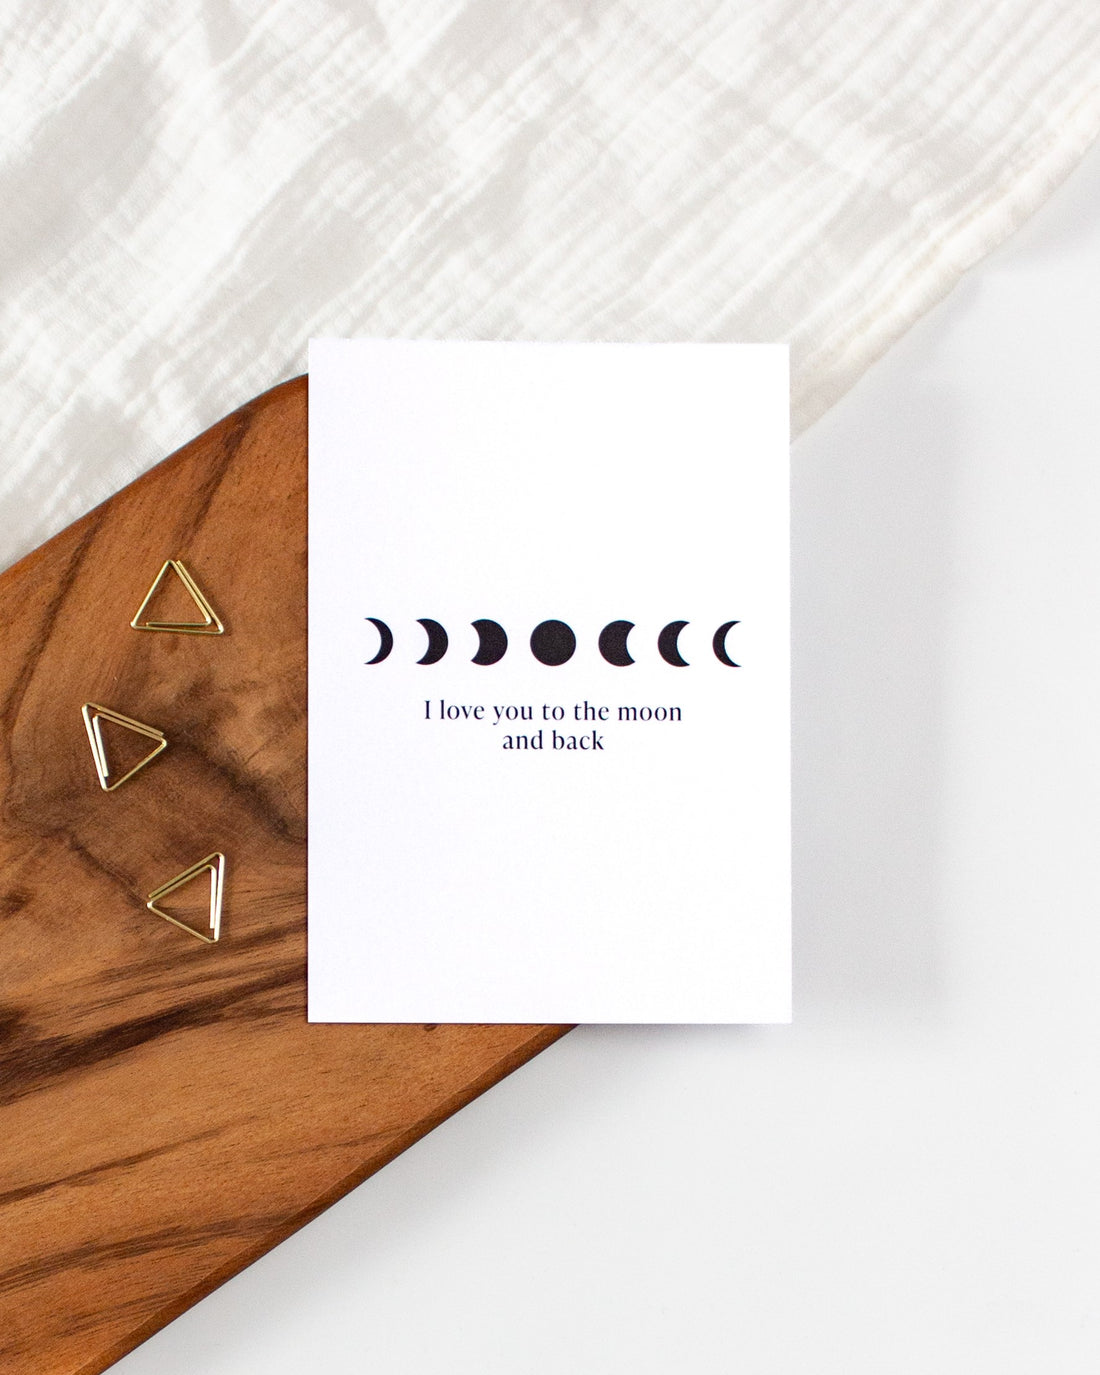 A white postcard laying on a wooden board with some golden triangle paperclips and a white cloth in the background. The postcard design shows simple black symbols of moon phases arranged in a horizontal line with some text below them saying &quot;I love you to the moon and back&quot;.